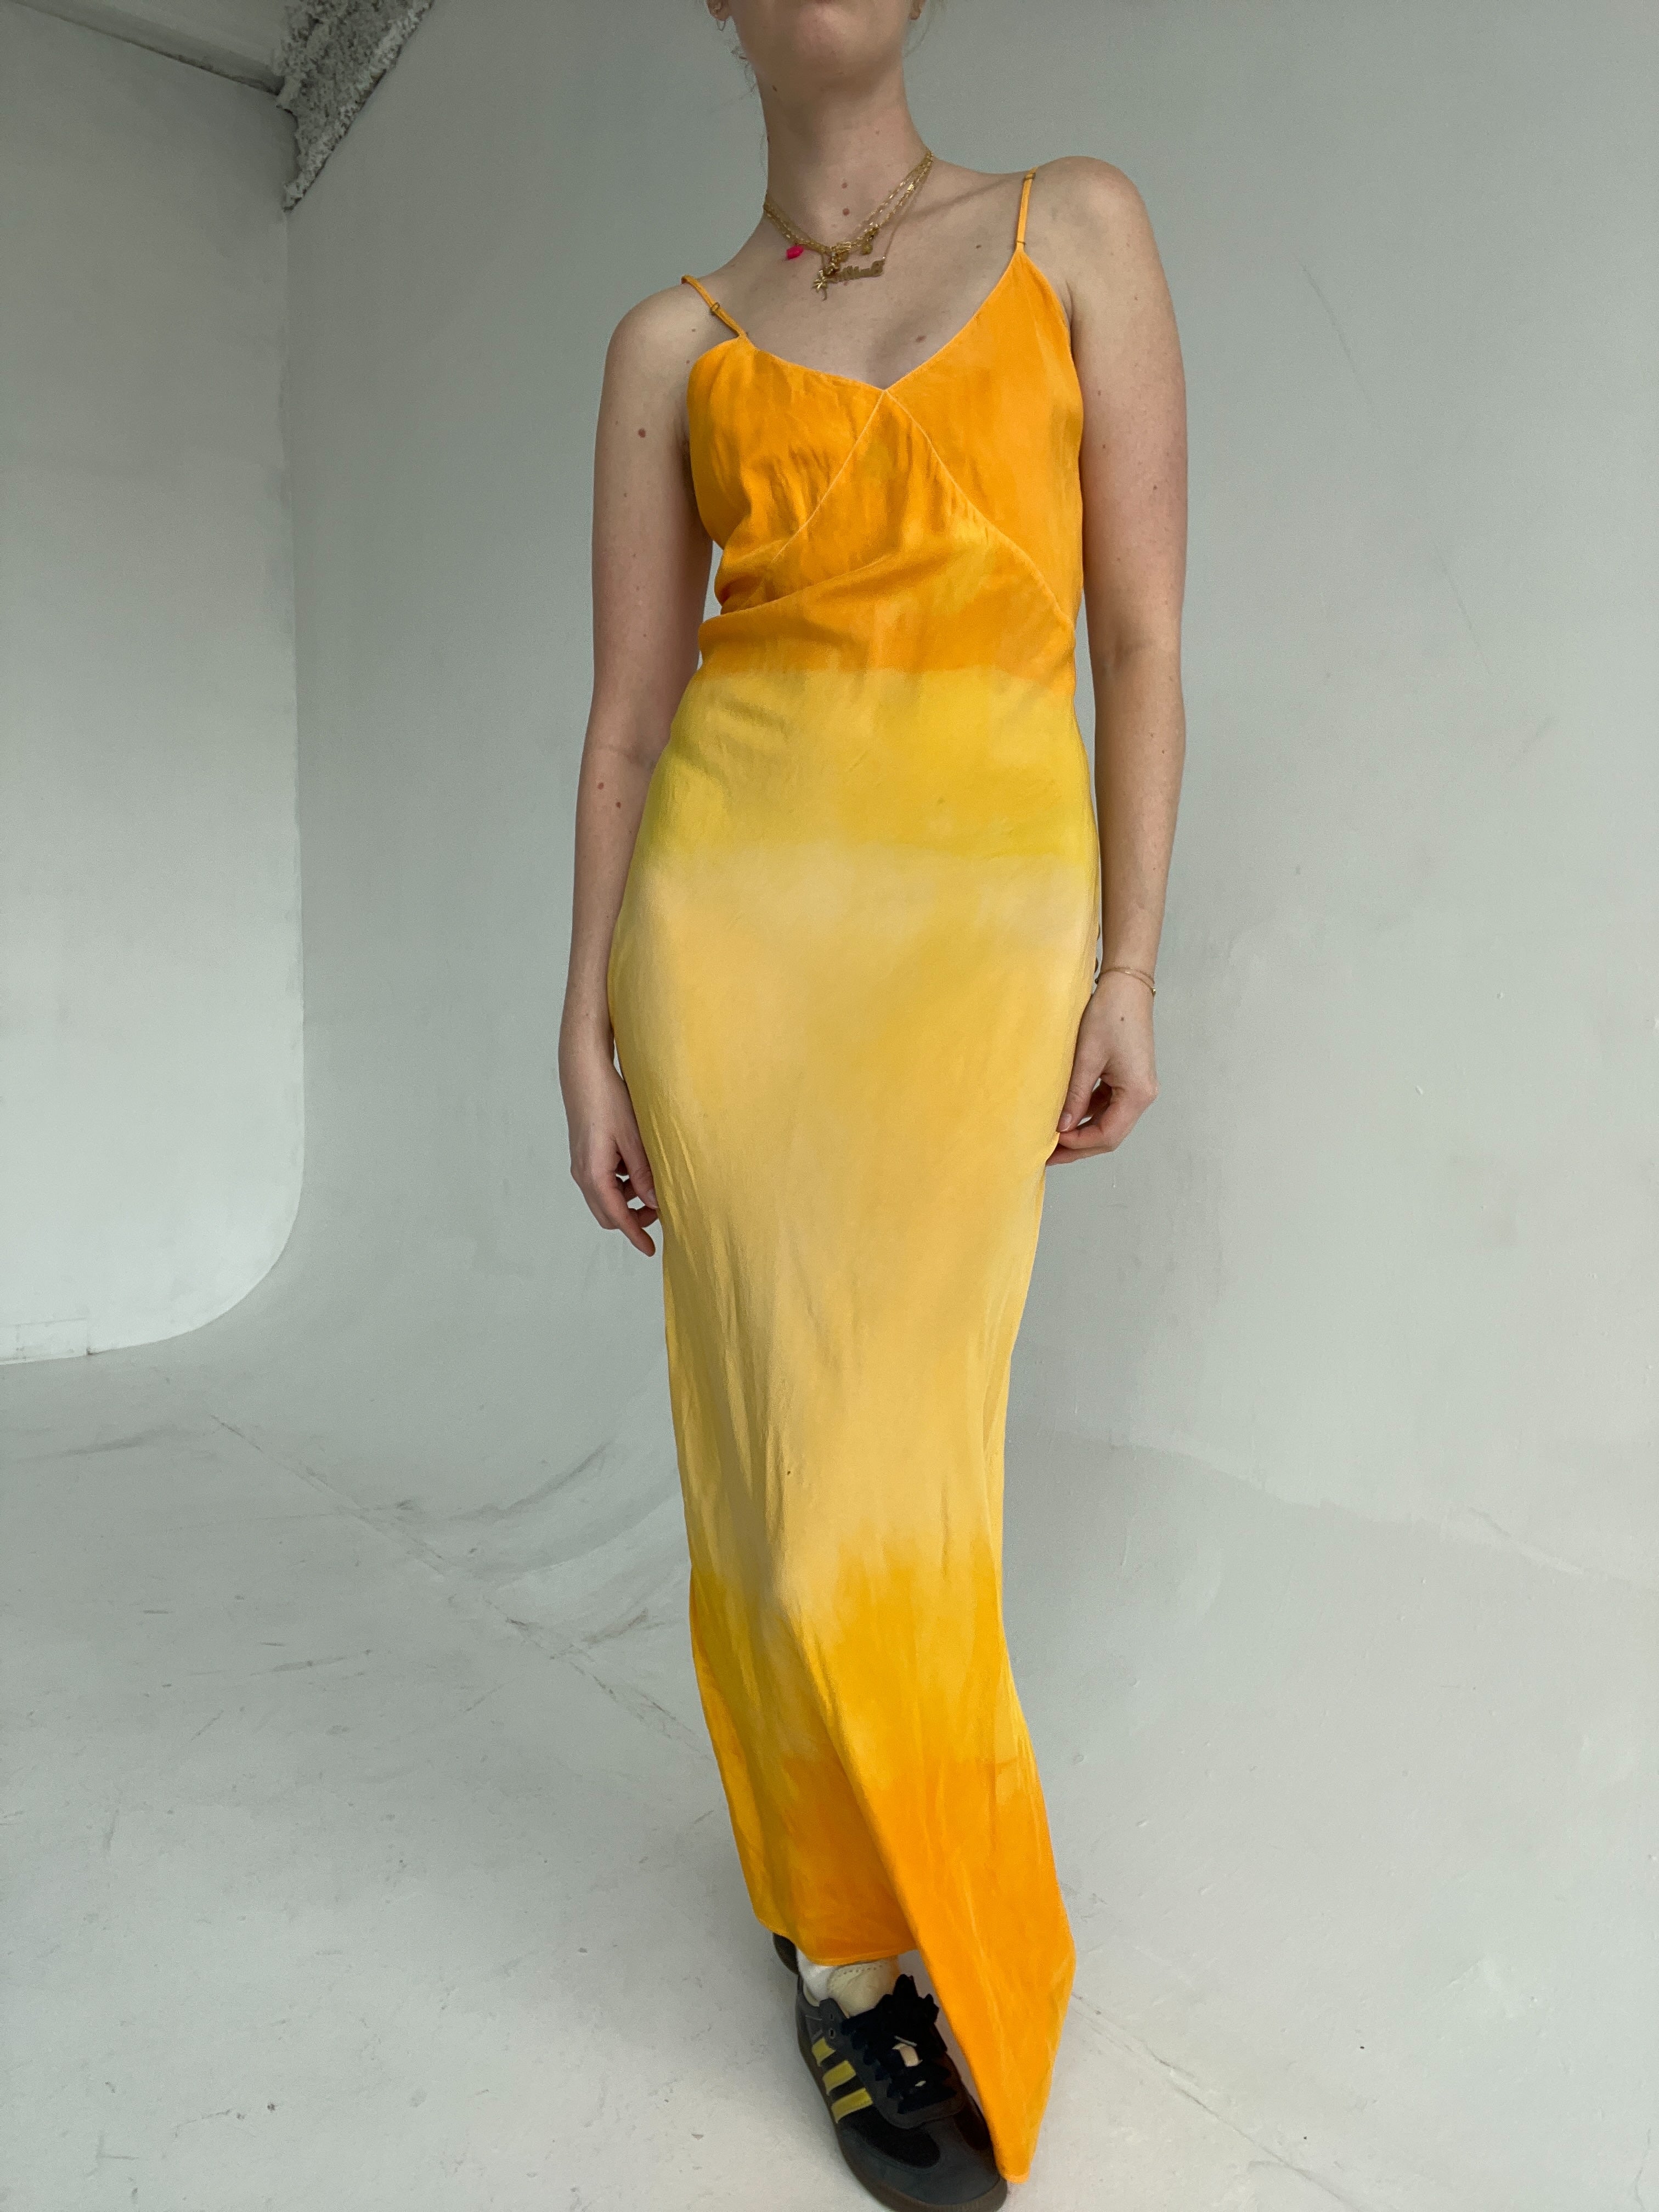 Hand Dyed Two Tone Orange and Yellow Slip